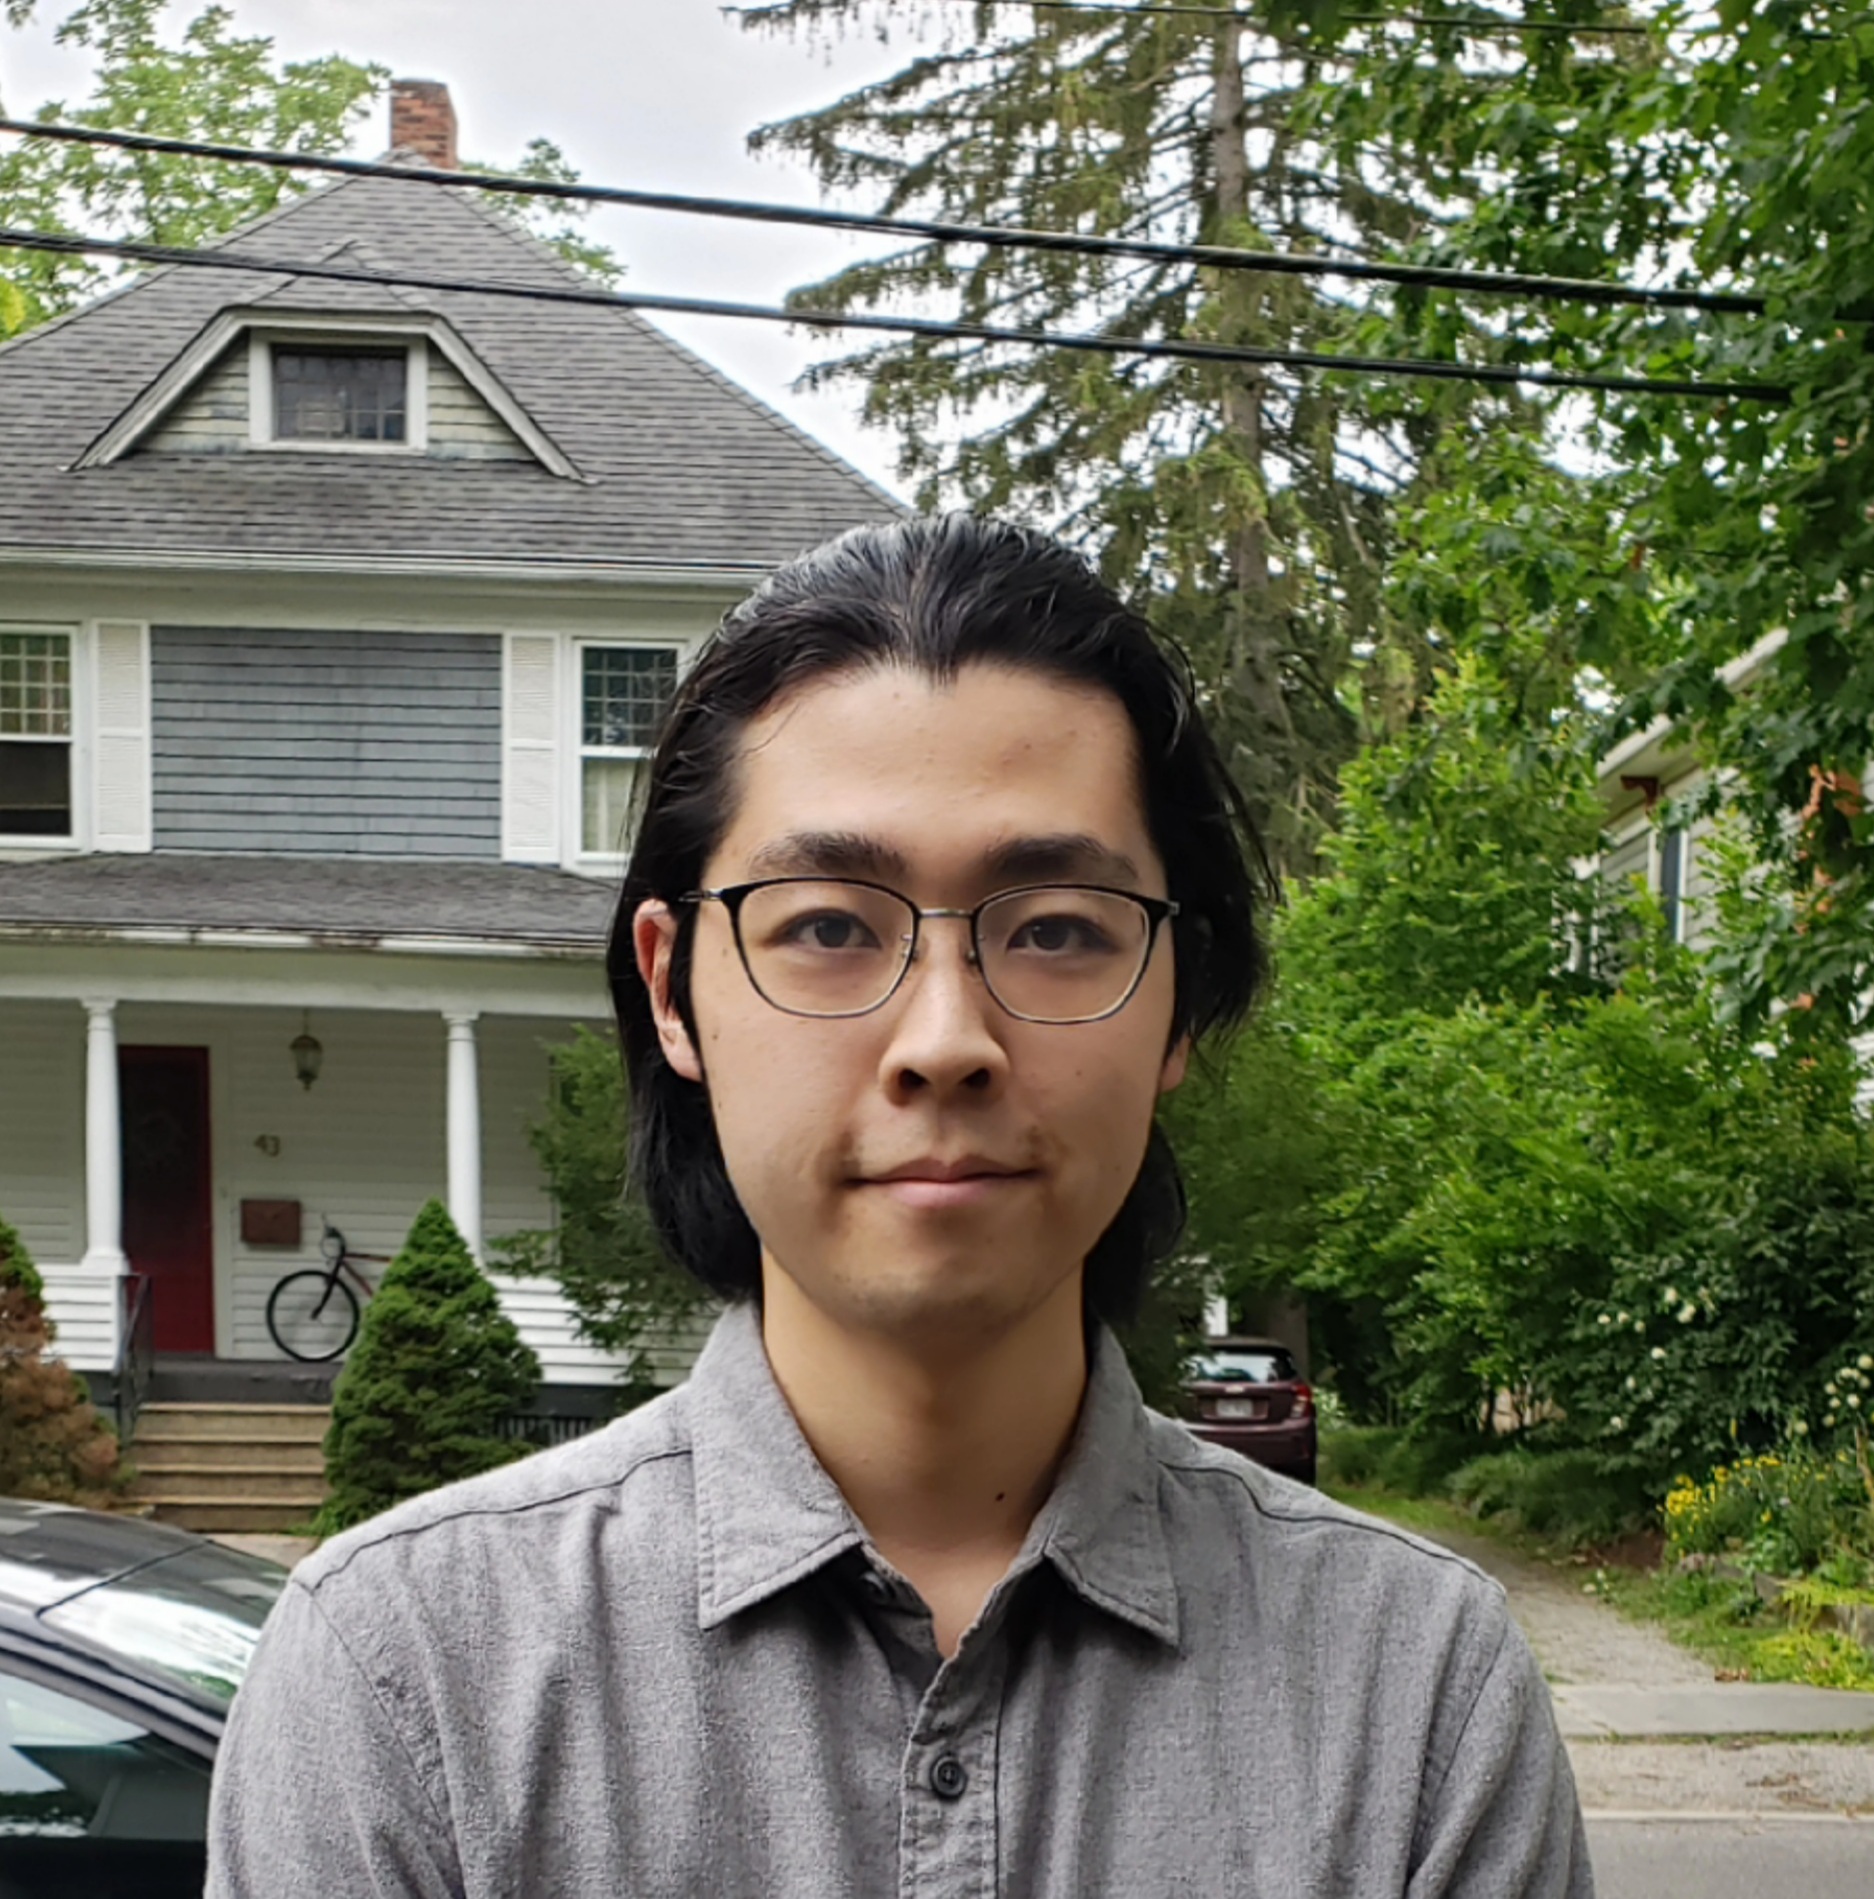 Person standing in front of a house with trees